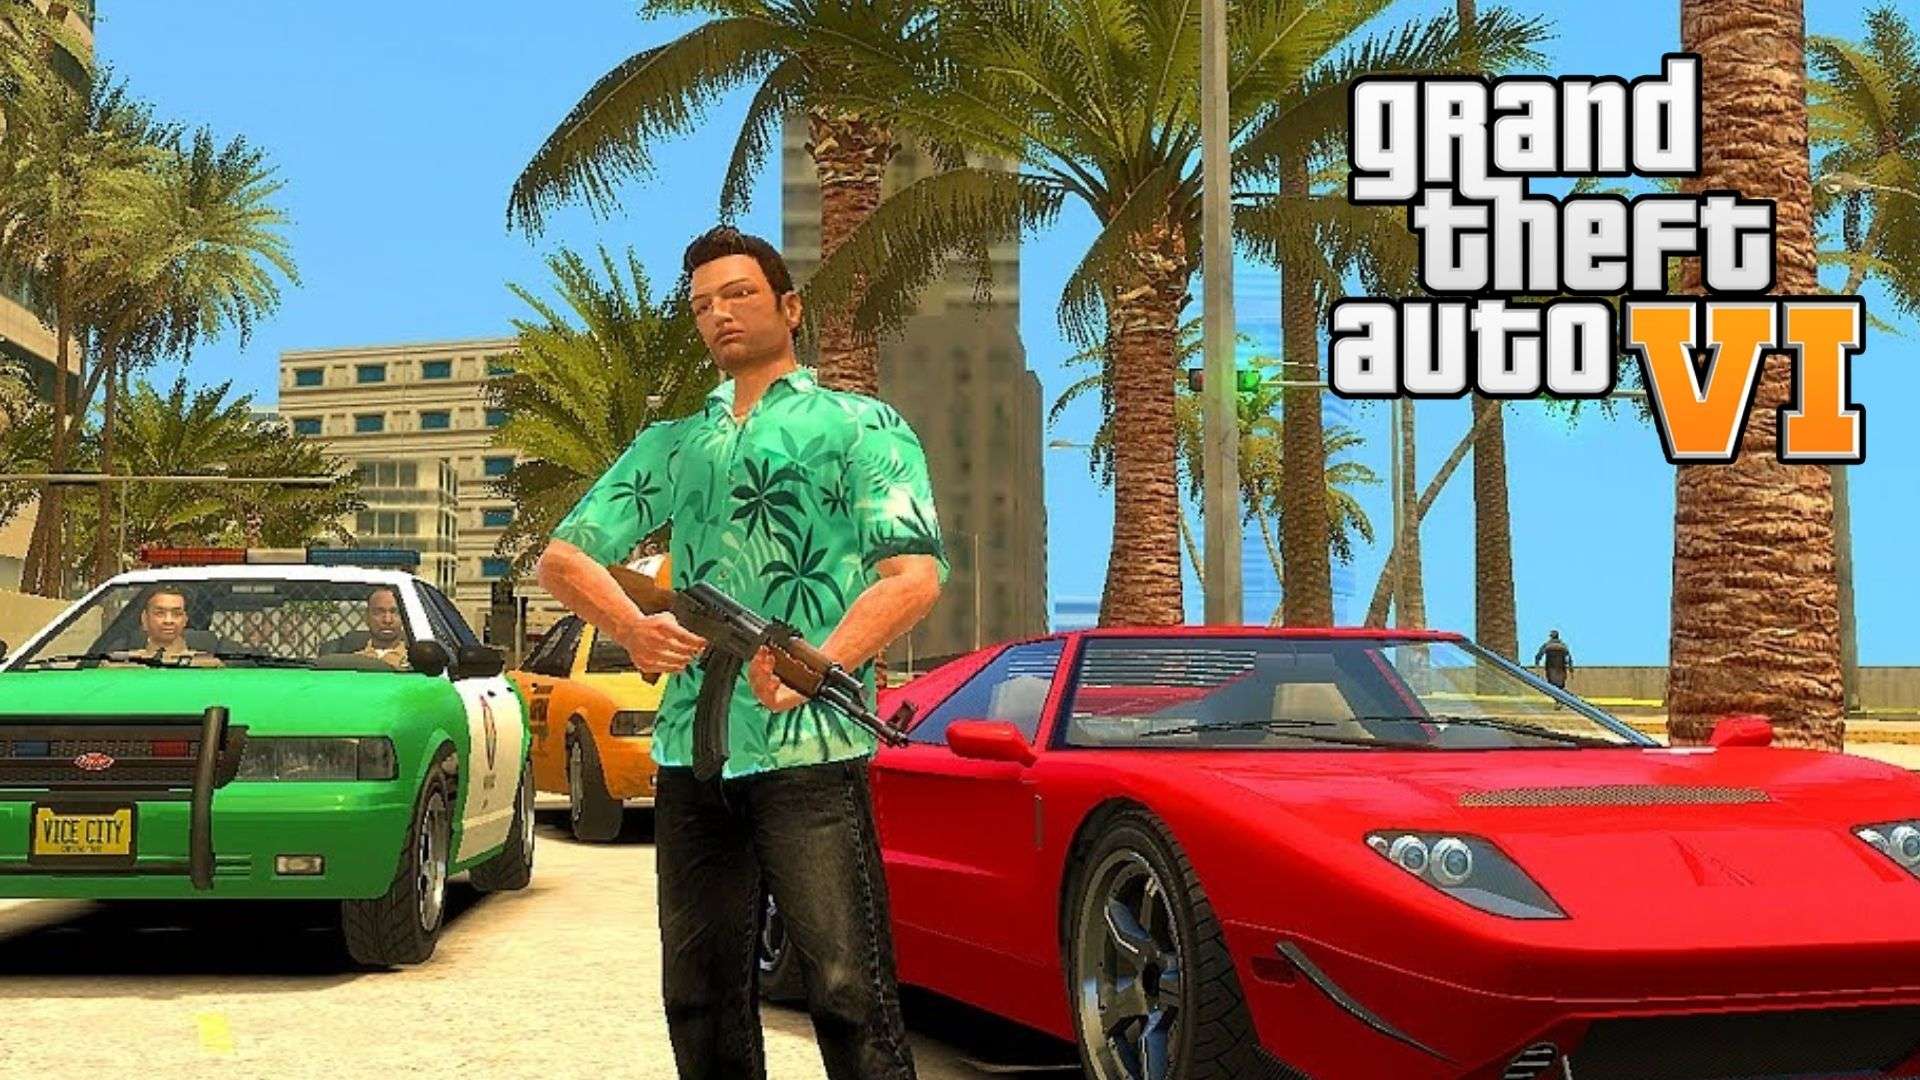 Vice City in Grand Theft Auto with updated graphics